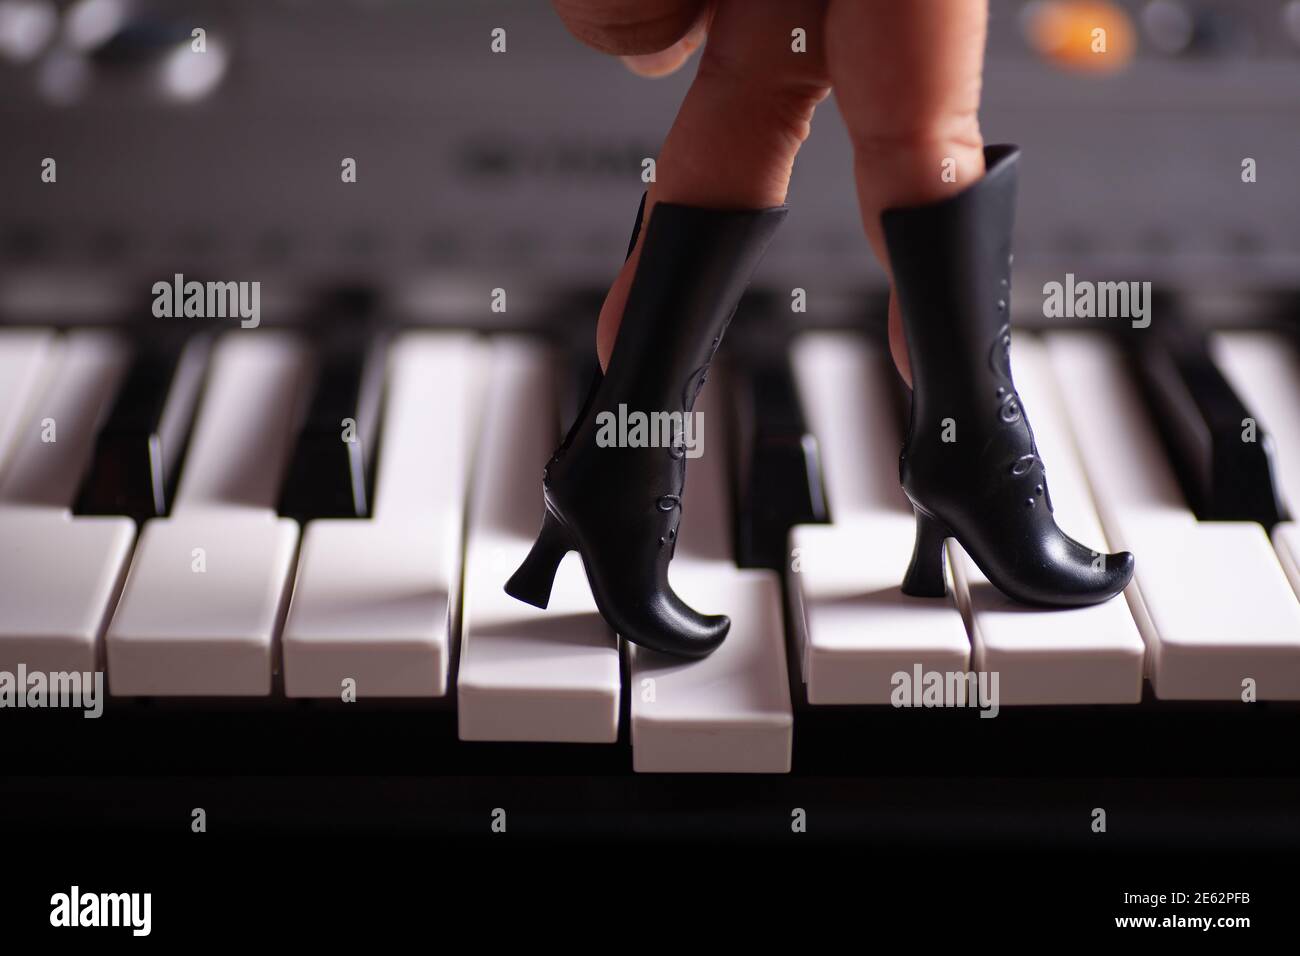 A close-up hand with fingers stuck in a toy black doll's boots steps on the piano keys Stock Photo